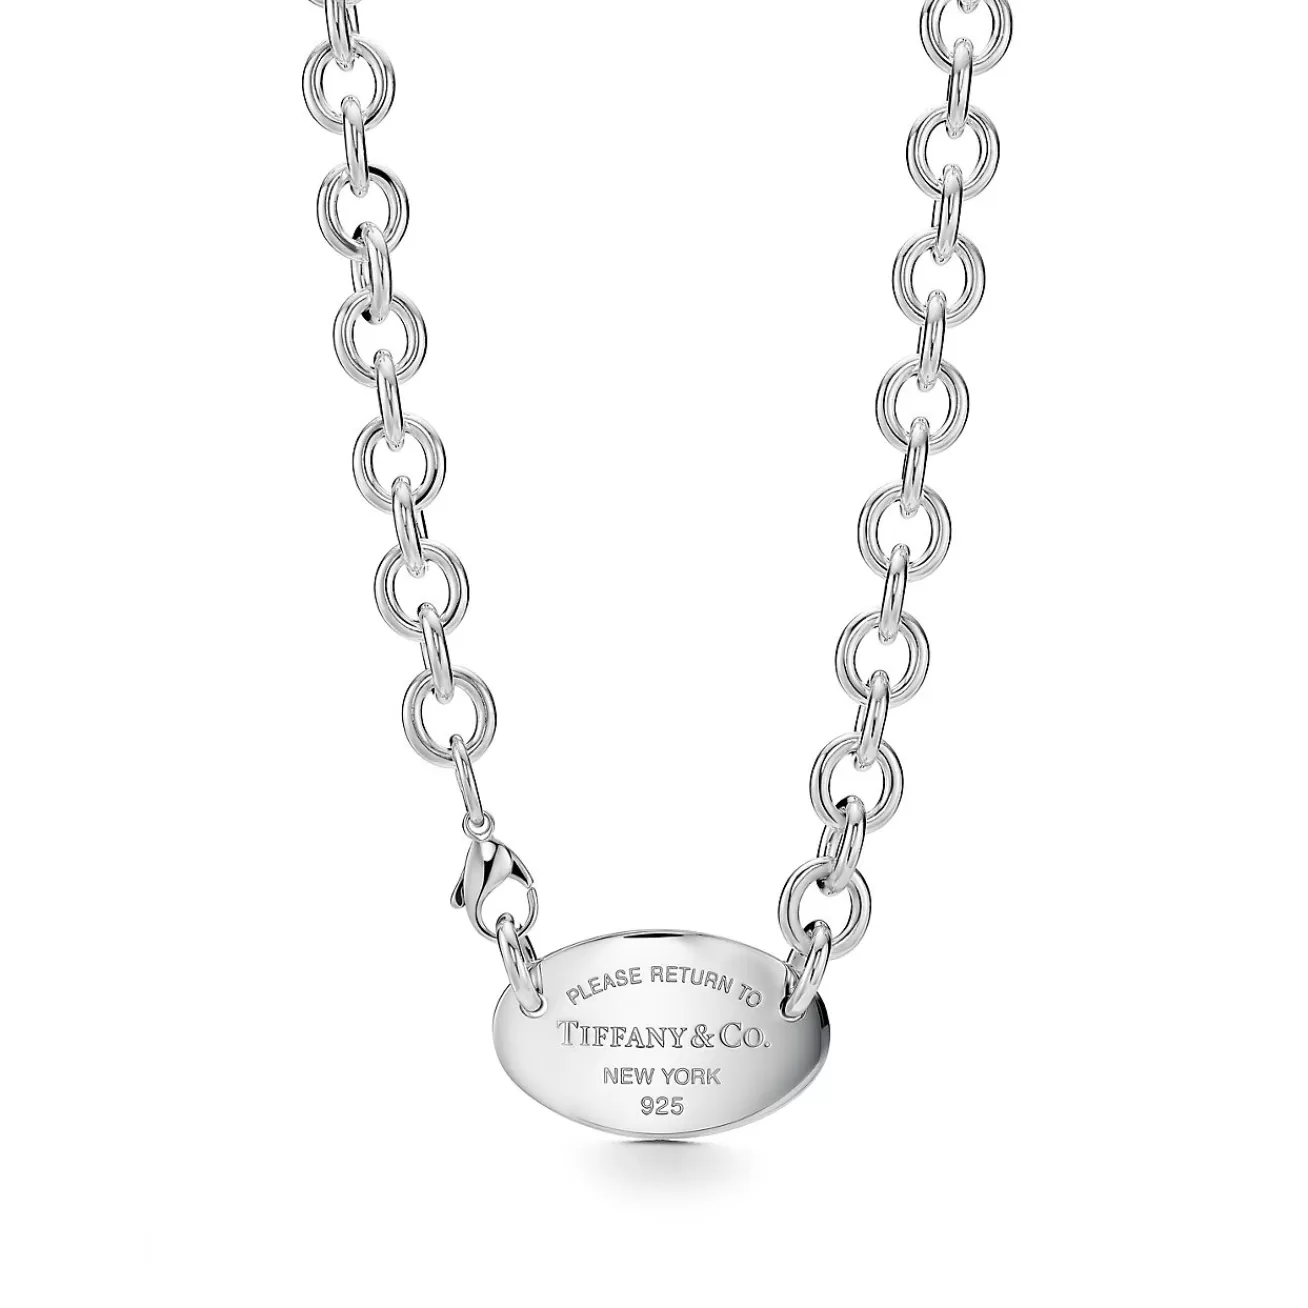 Tiffany & Co. Return to Tiffany® oval tag necklace in sterling silver, 15.5". | ^ Necklaces & Pendants | Bold Silver Jewelry